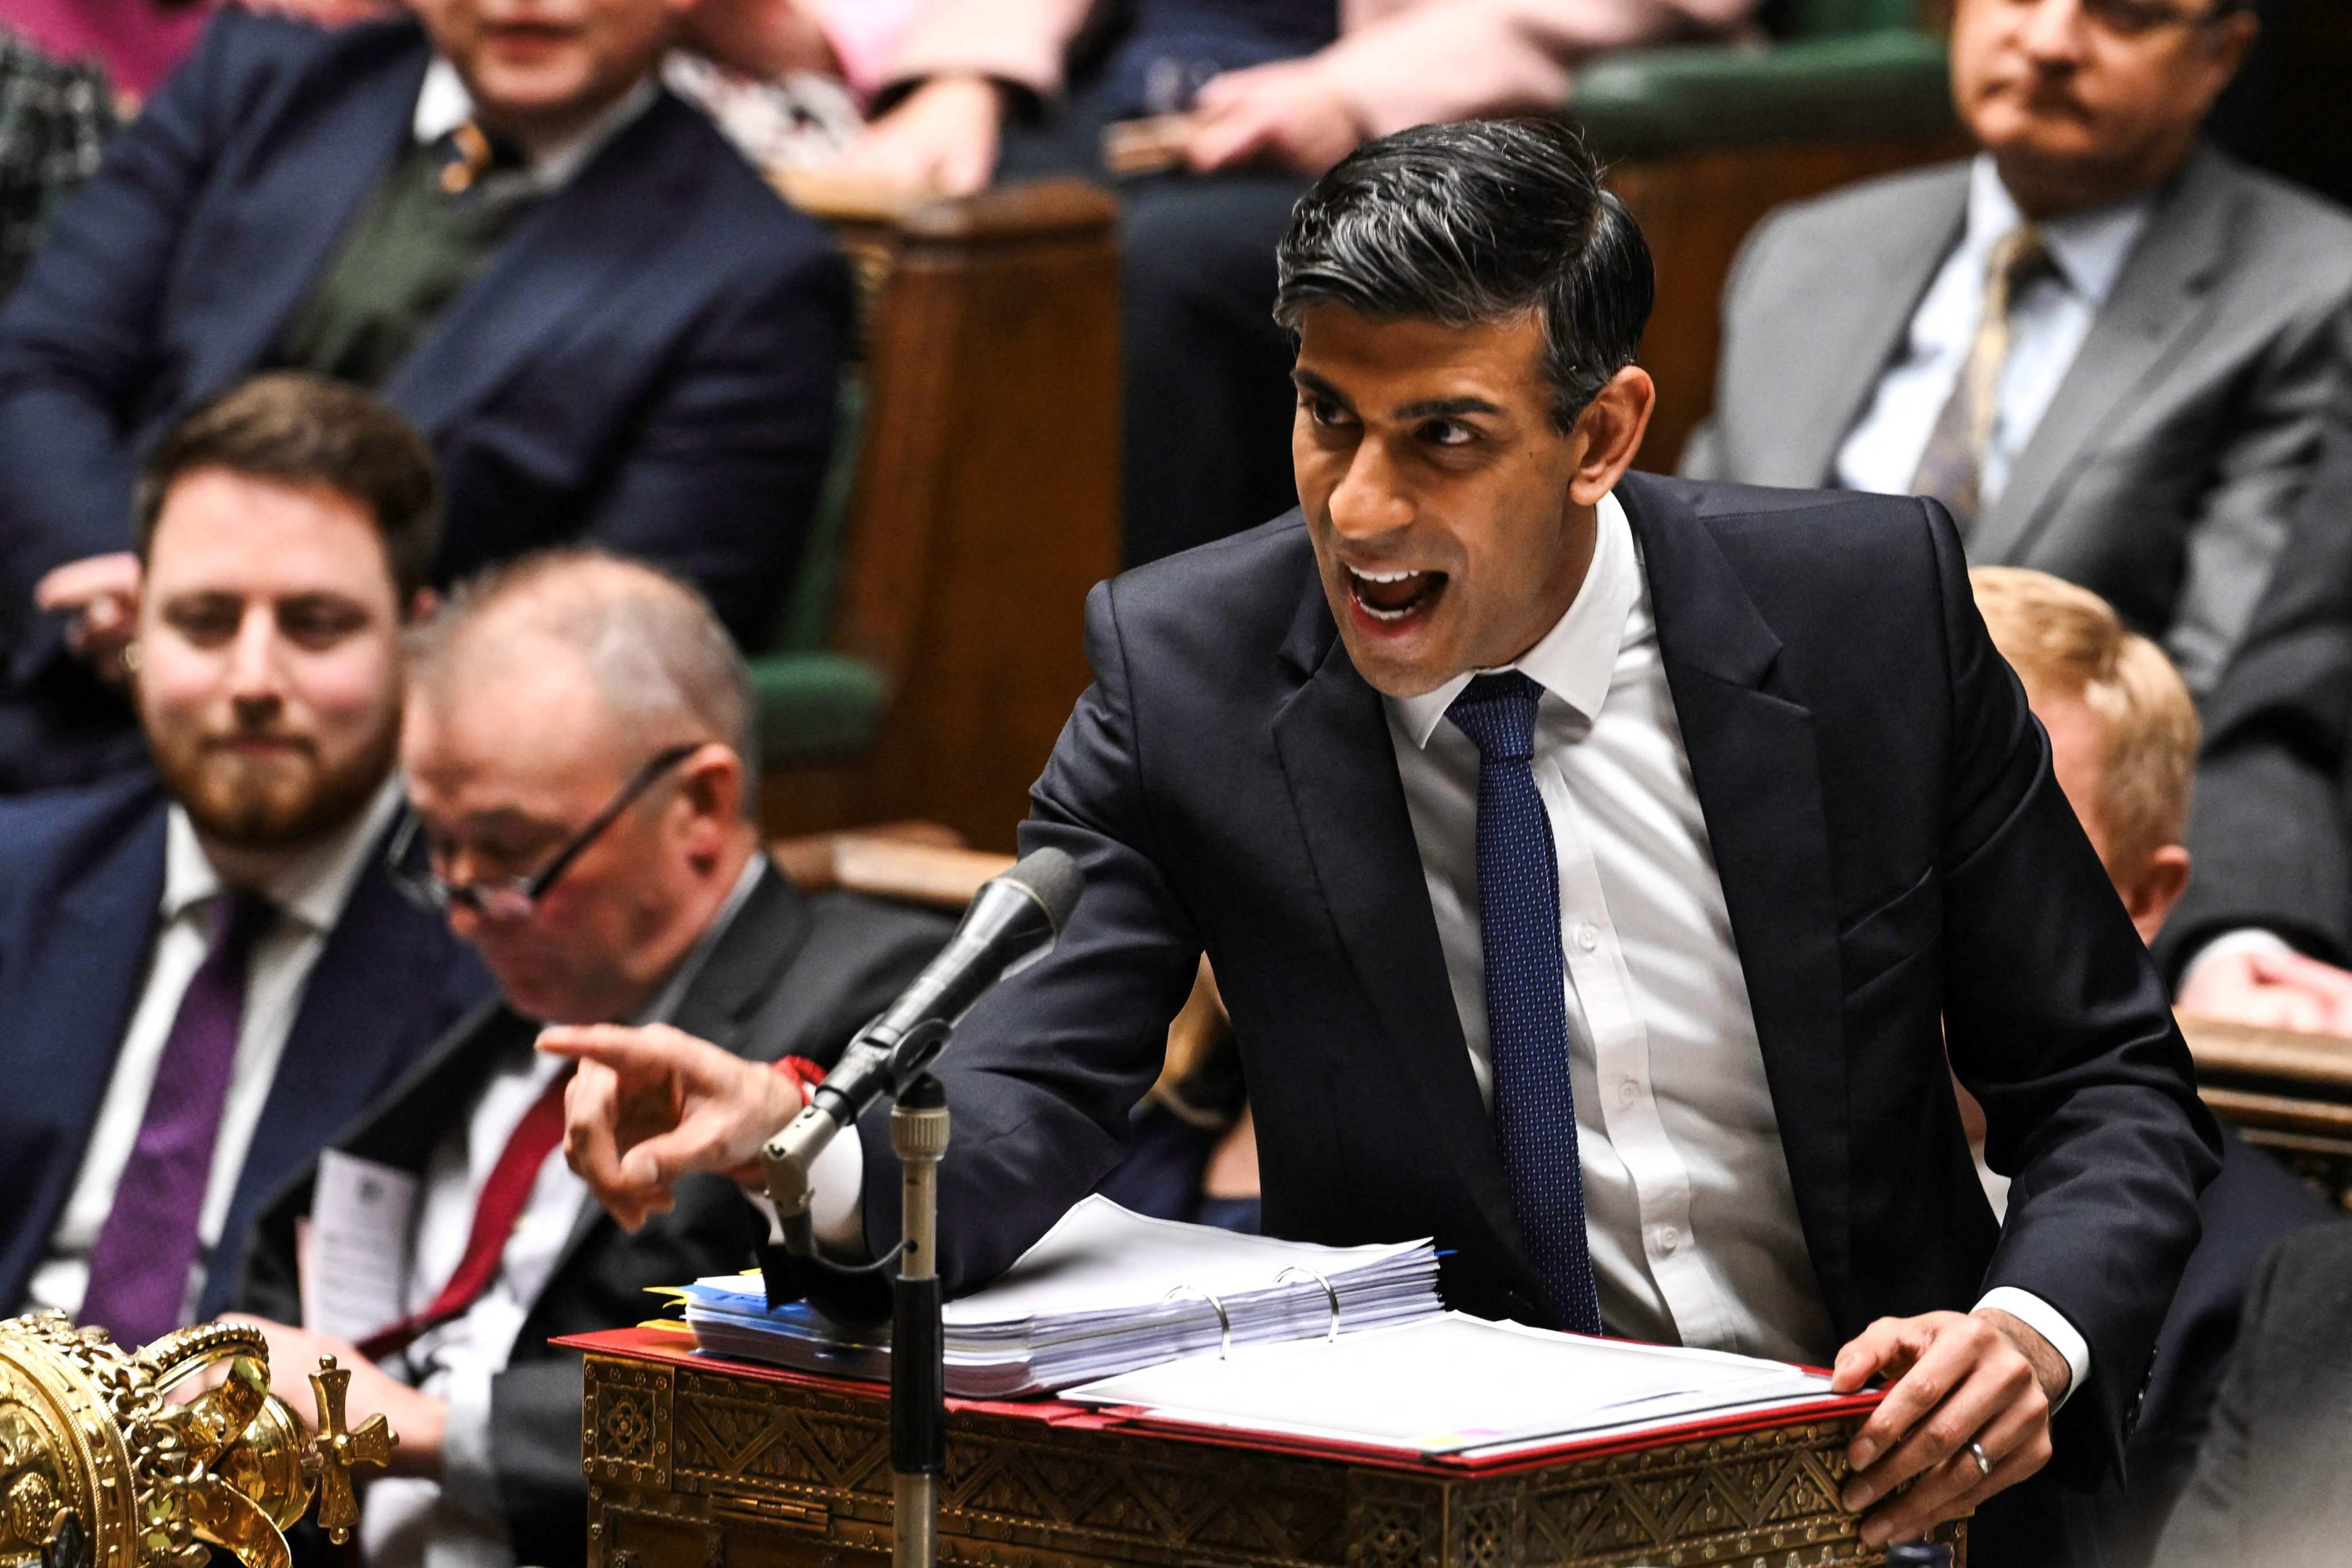 Britain’s Prime Minister Rishi Sunak speaks during Prime Minister’s Questions in the House of Commons in London on Wednesday. Photo: UK Parliament via AFP